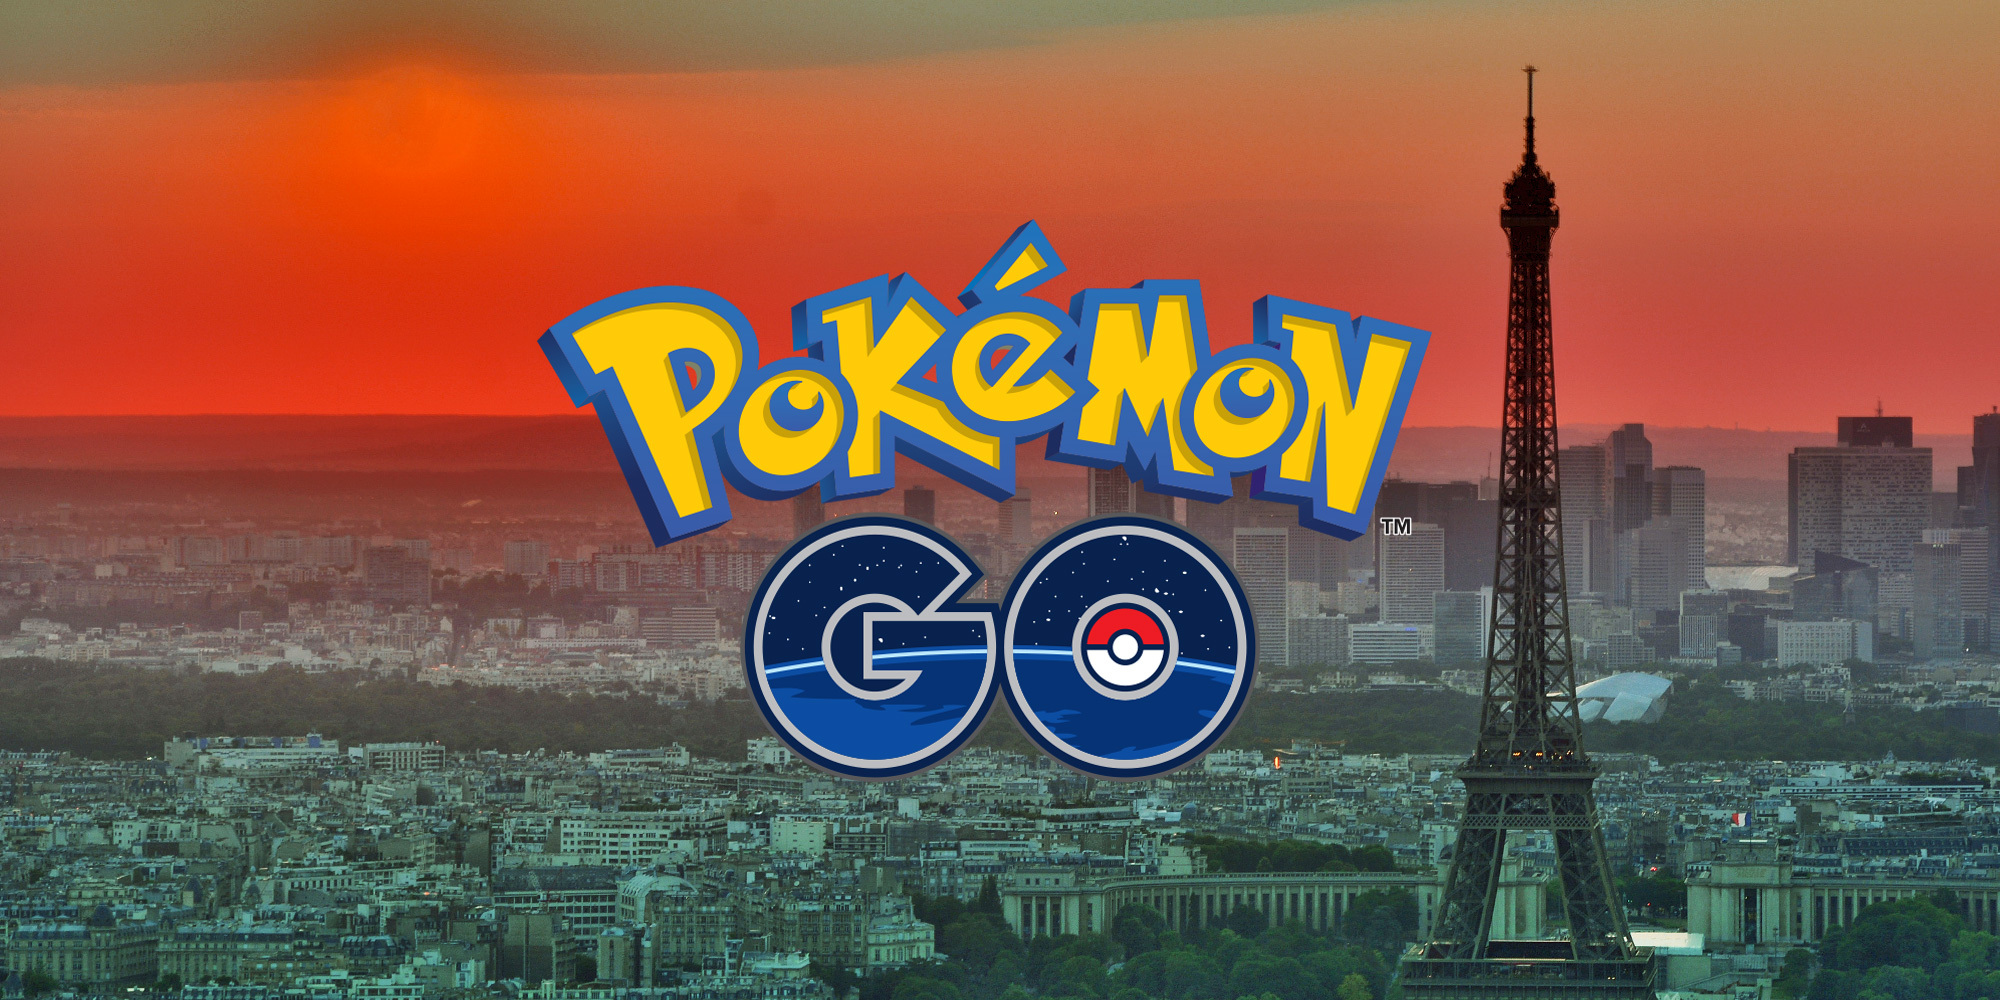 Pokémon Go: How much longer will the game survive?